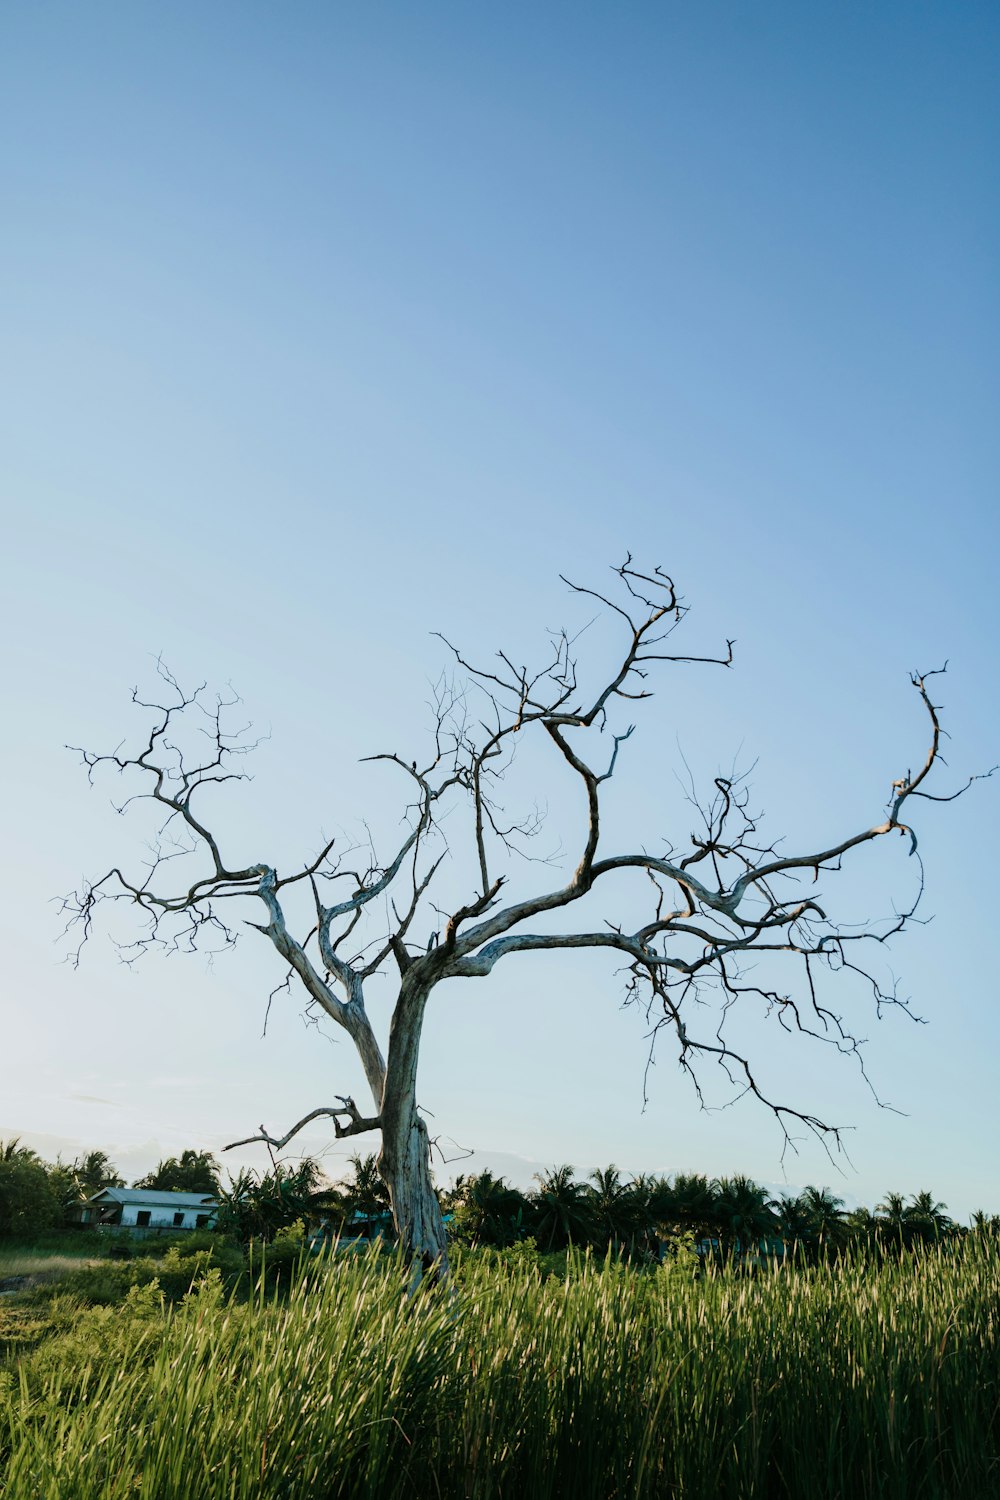 a bare tree in a grassy field under a blue sky